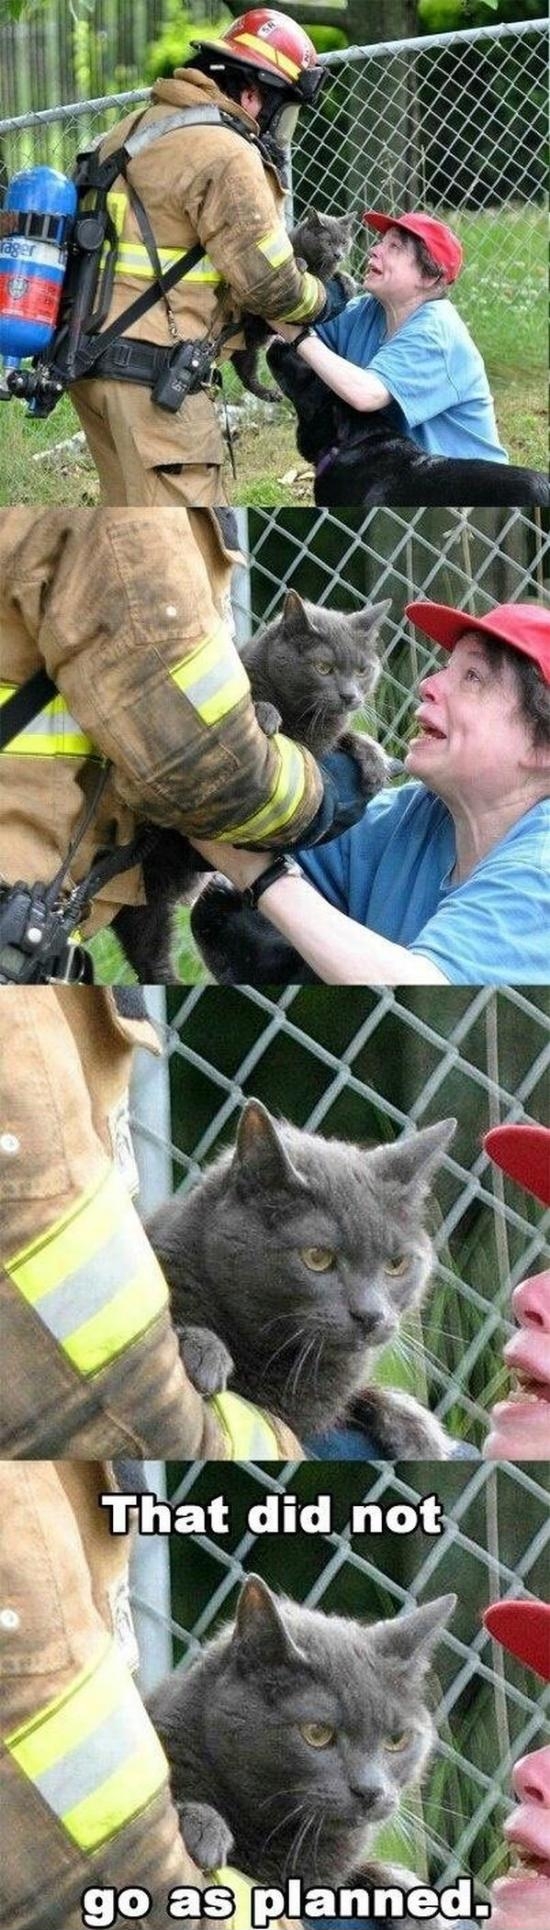 Fireman saves cat from house fire.